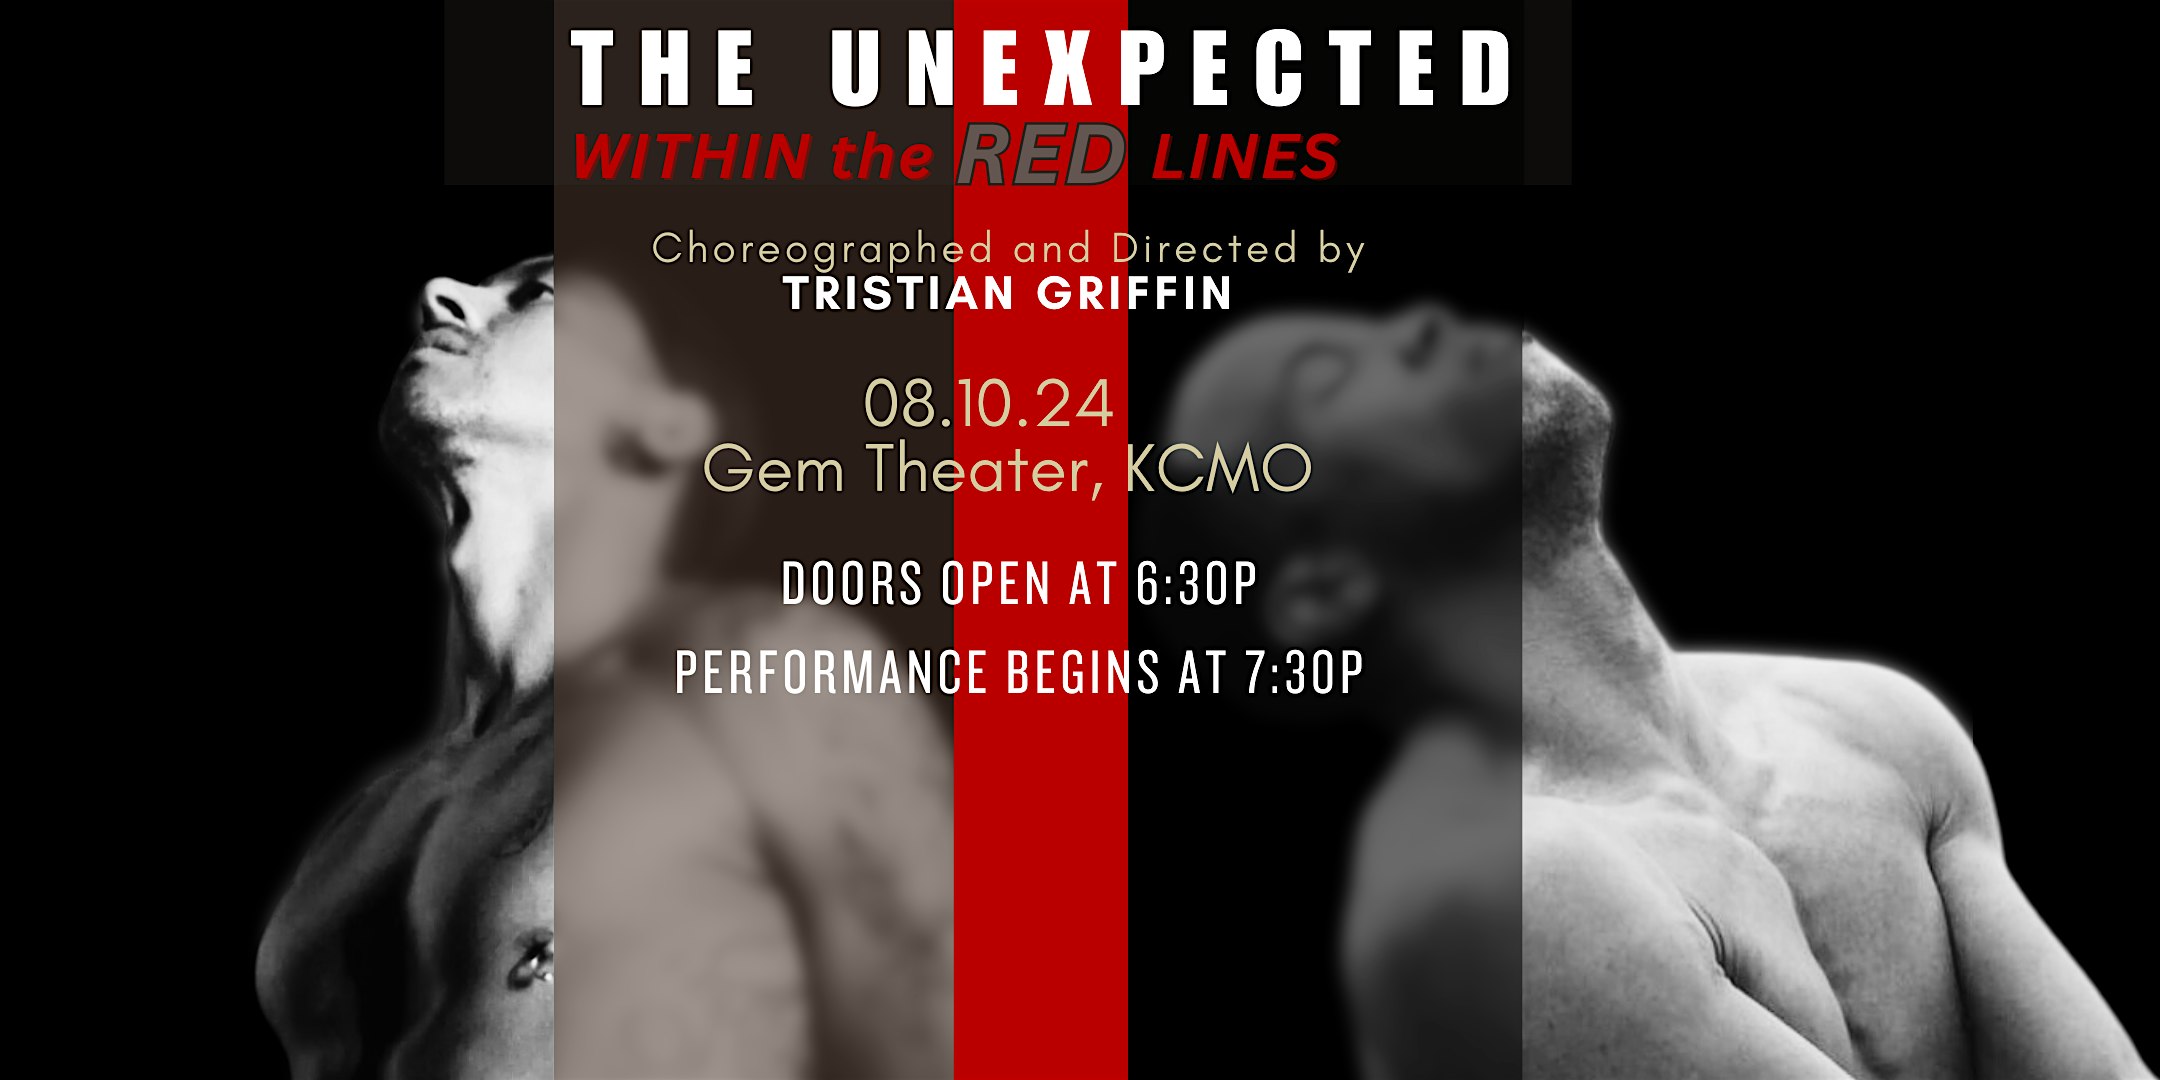 Tristian Griffin Dance Co. presents The Unexpected: Within the Red Lines